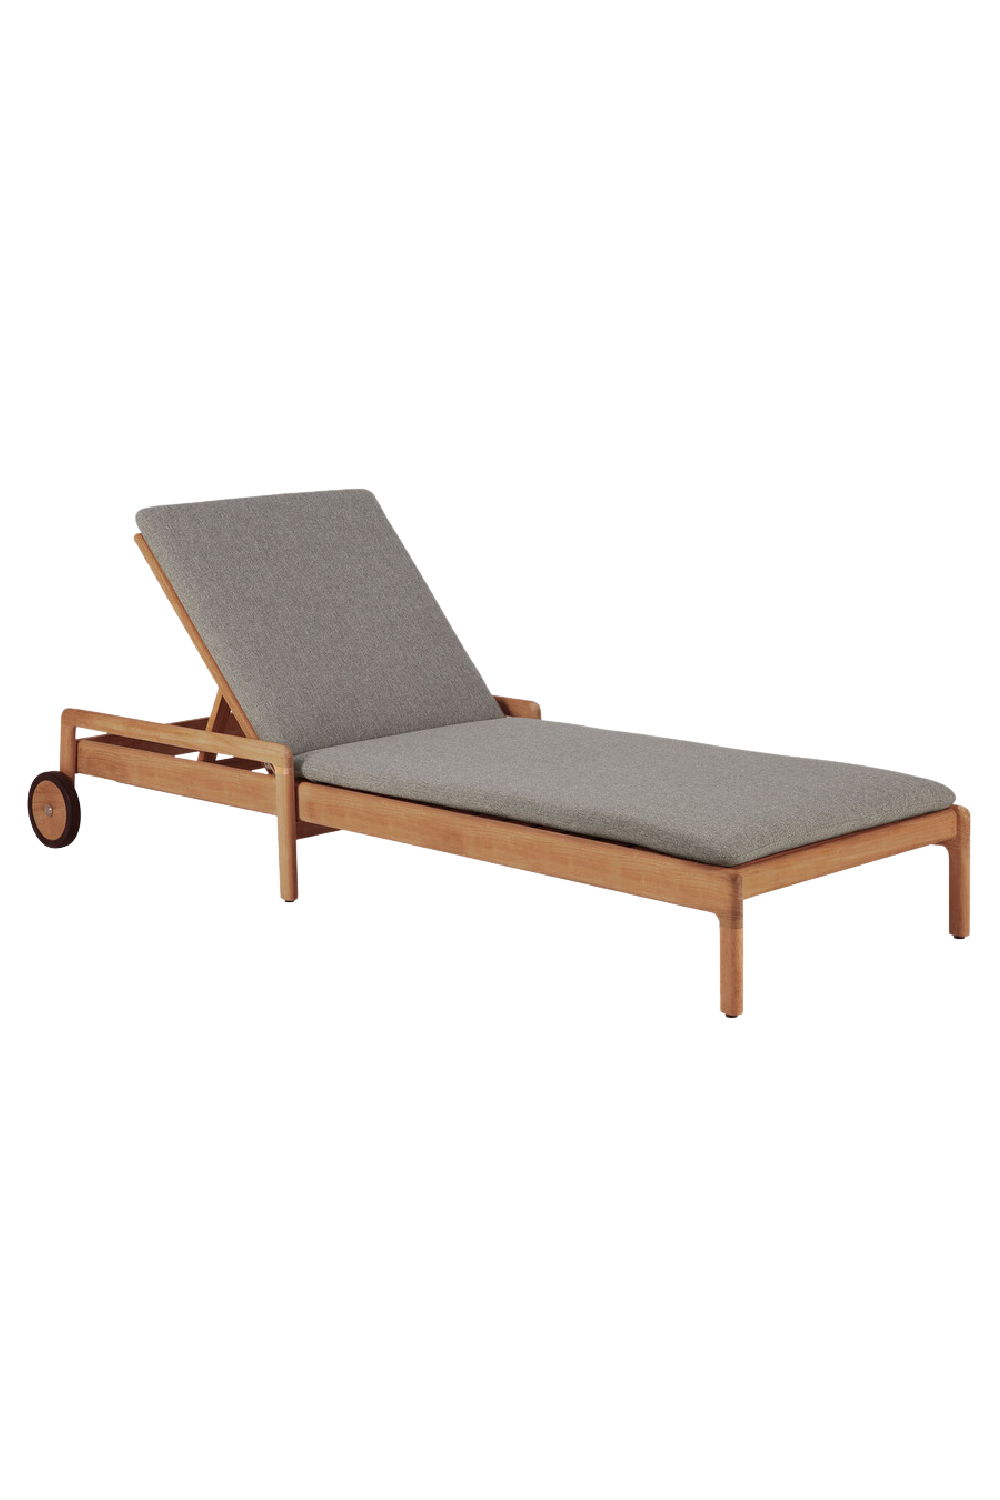 Cushioned Outdoor Adjustable Lounger | Ethnicraft Jack | Oroa.com